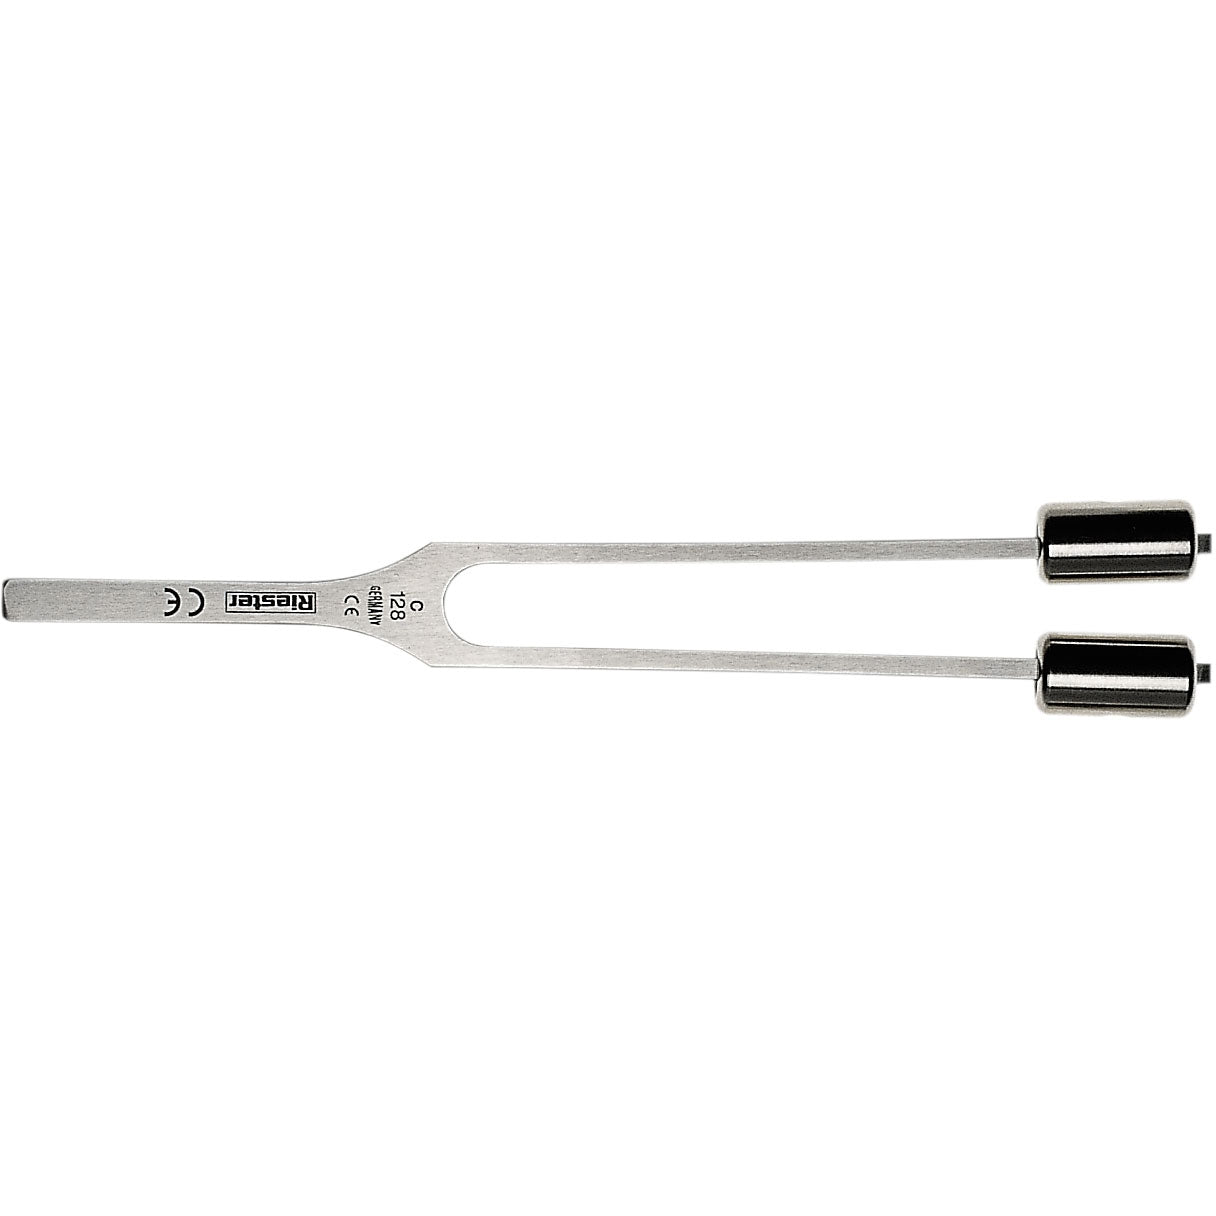 Tuning fork C 128 - Stainless Steel